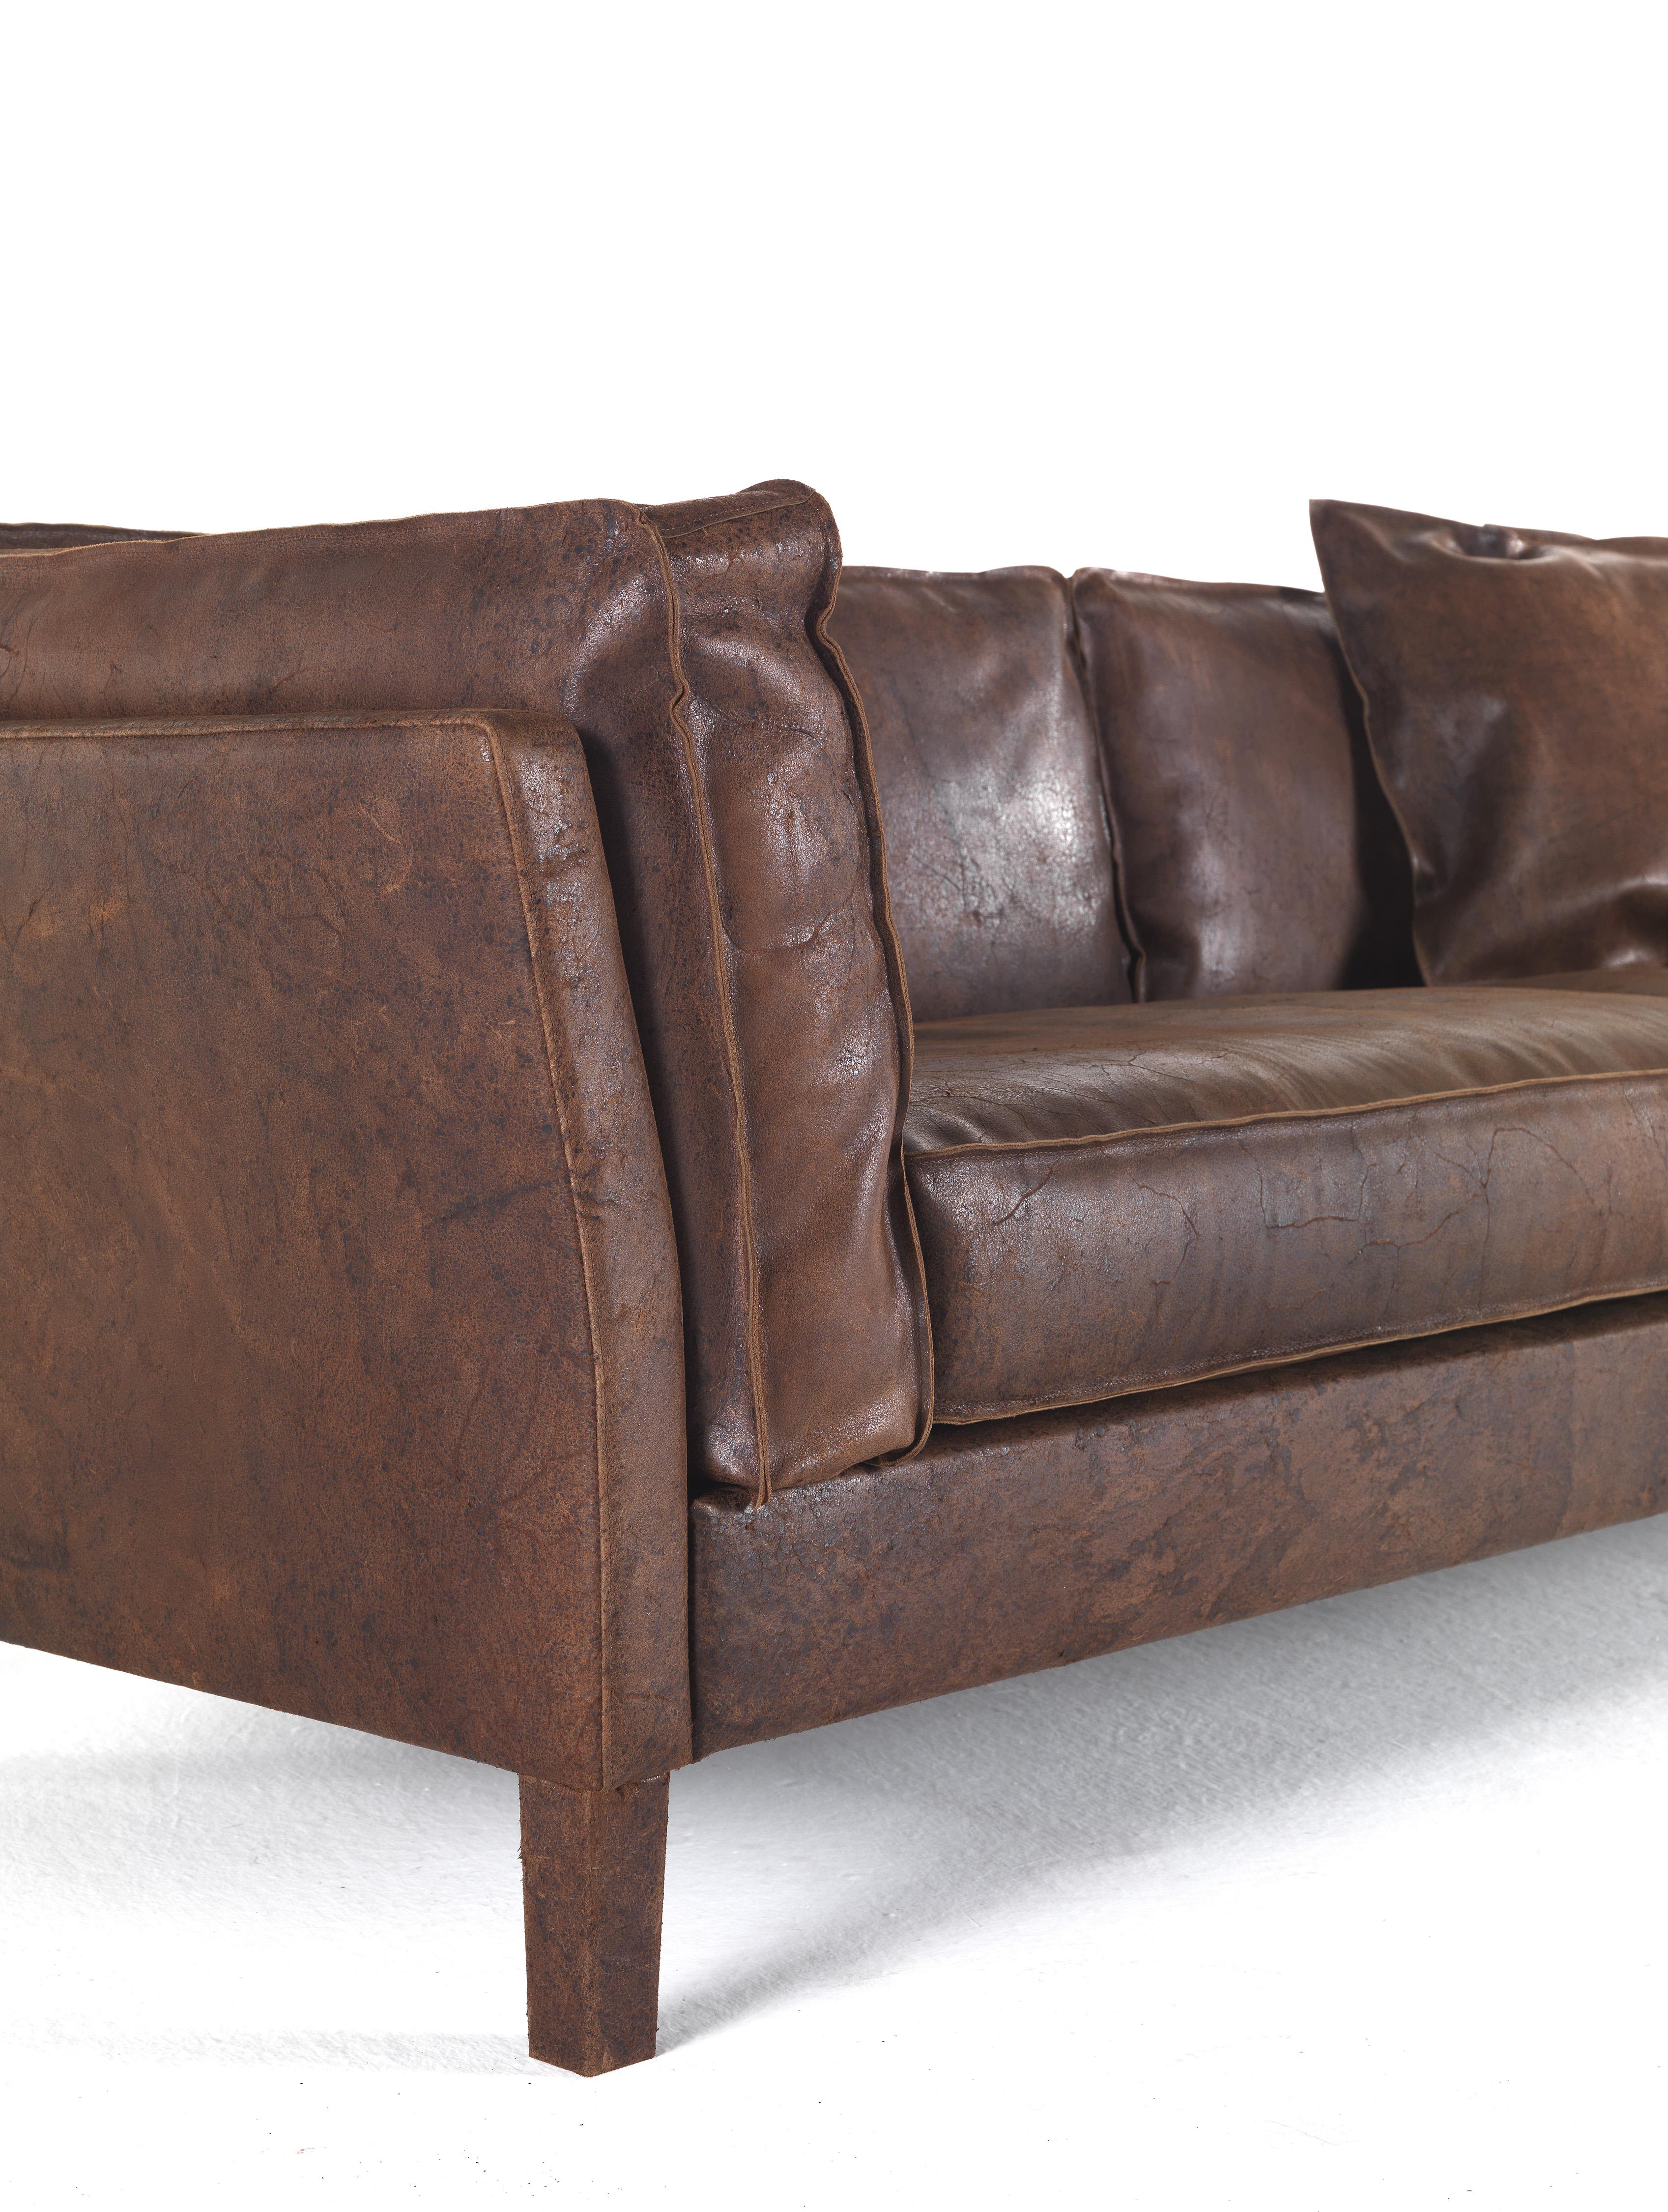 Modern 21st Century Loft 3-Seater Sofa in Leather by Gianfranco Ferré Home